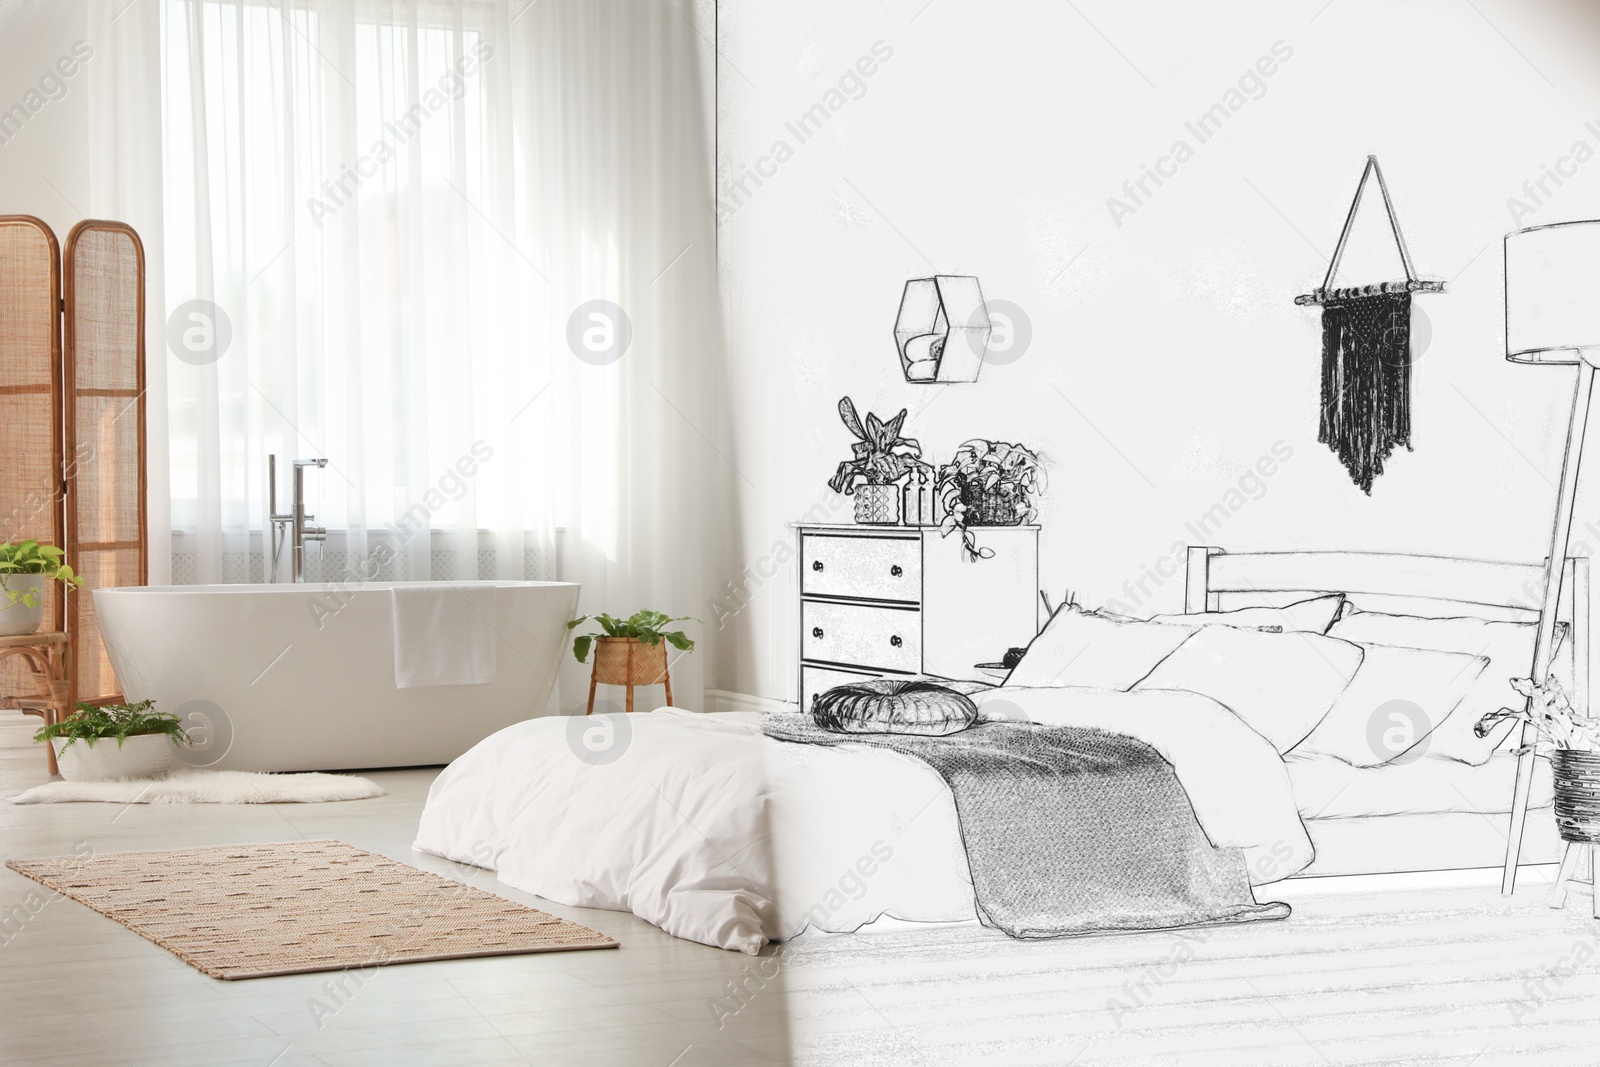 Image of From idea to realization. Cozy apartment interior with combined bathroom and sleeping areas. Collage of photo and sketch